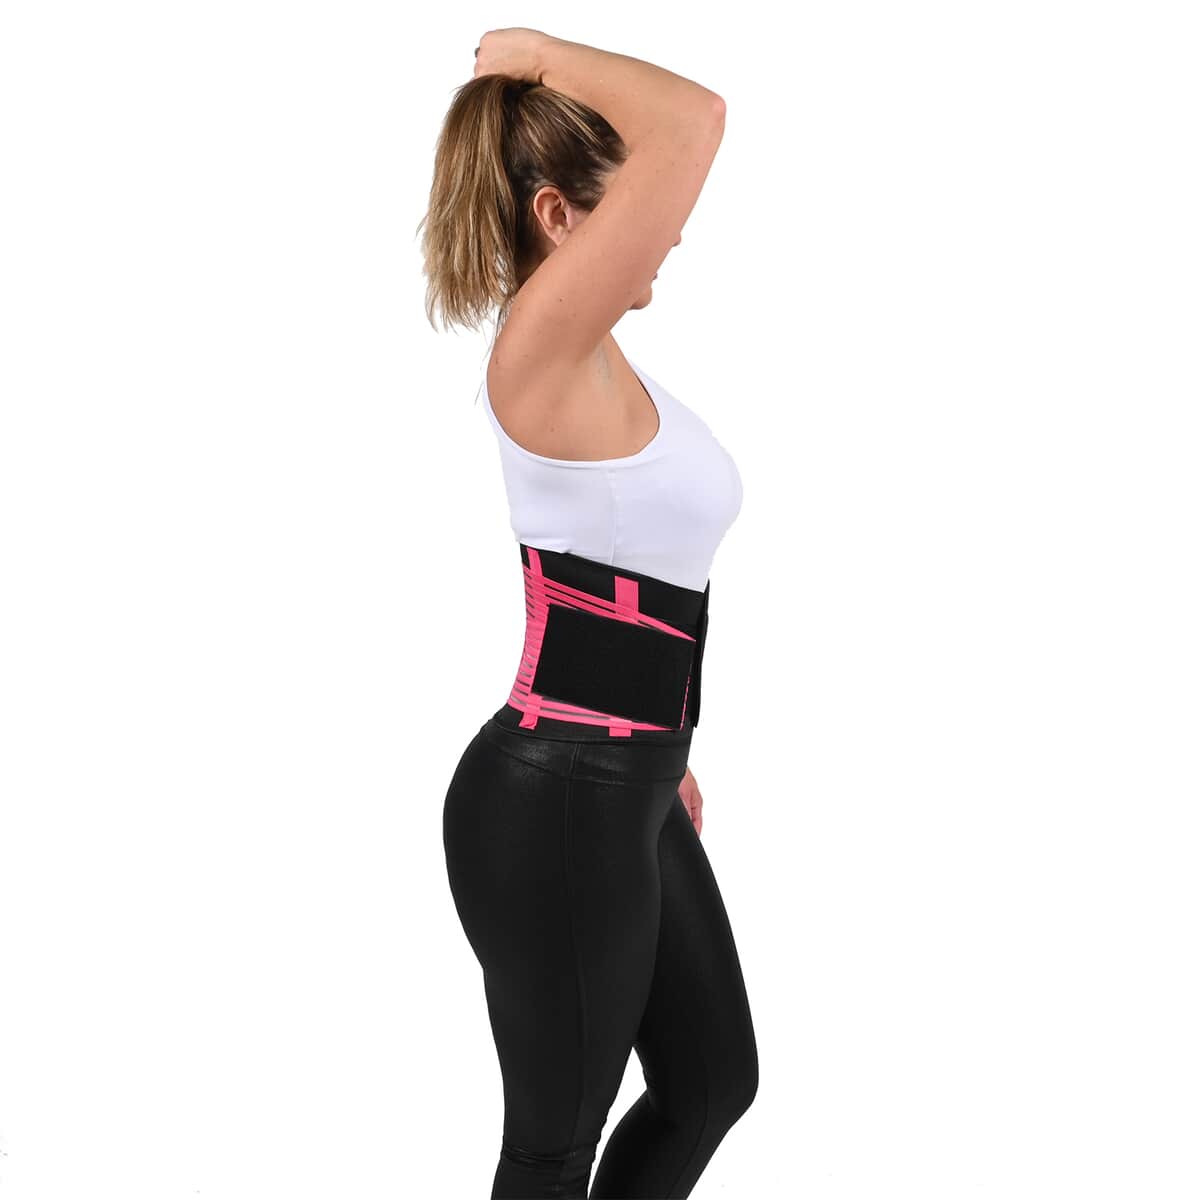 Letsfit Pink Waist Trainer Lumber Support Belt with Measuring Tape - M image number 1